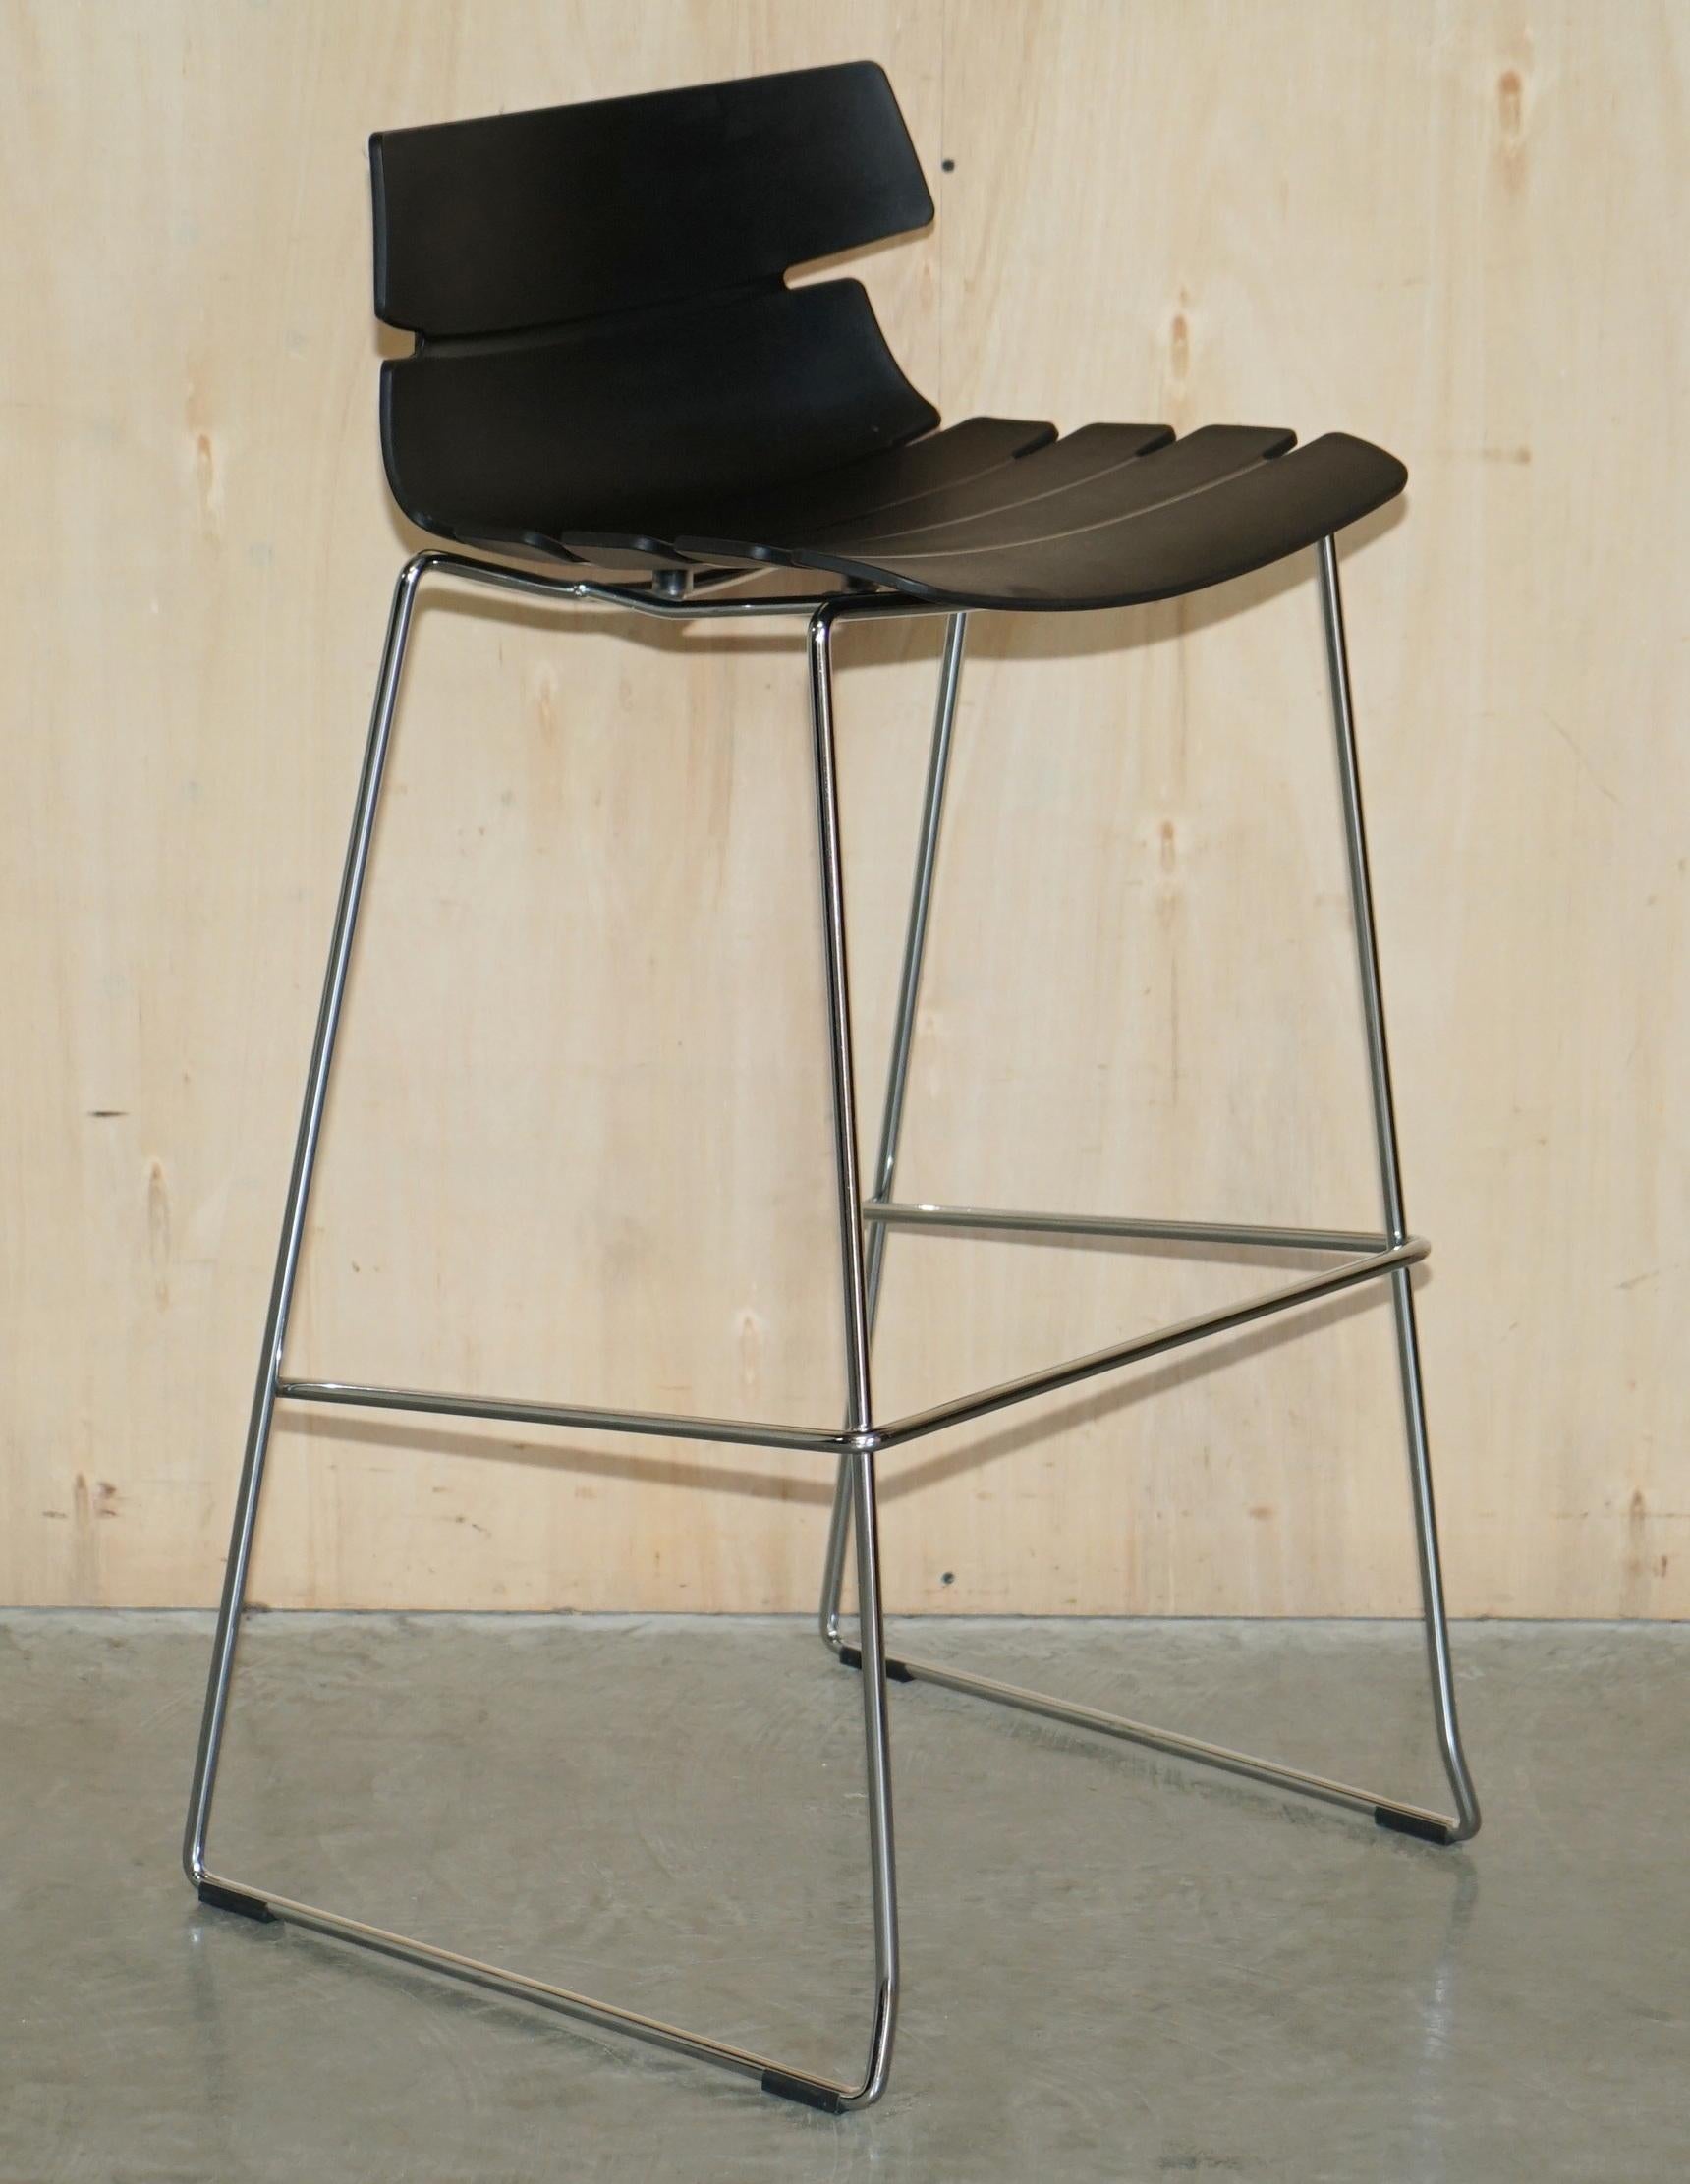 We are delighted to offer for sale this lovely unique suite of four Whiteleaf furniture LTD black stacking bar stools which are part of a suite

I have eight of these stools in total, four grey and four black, this sale is for the four black, the